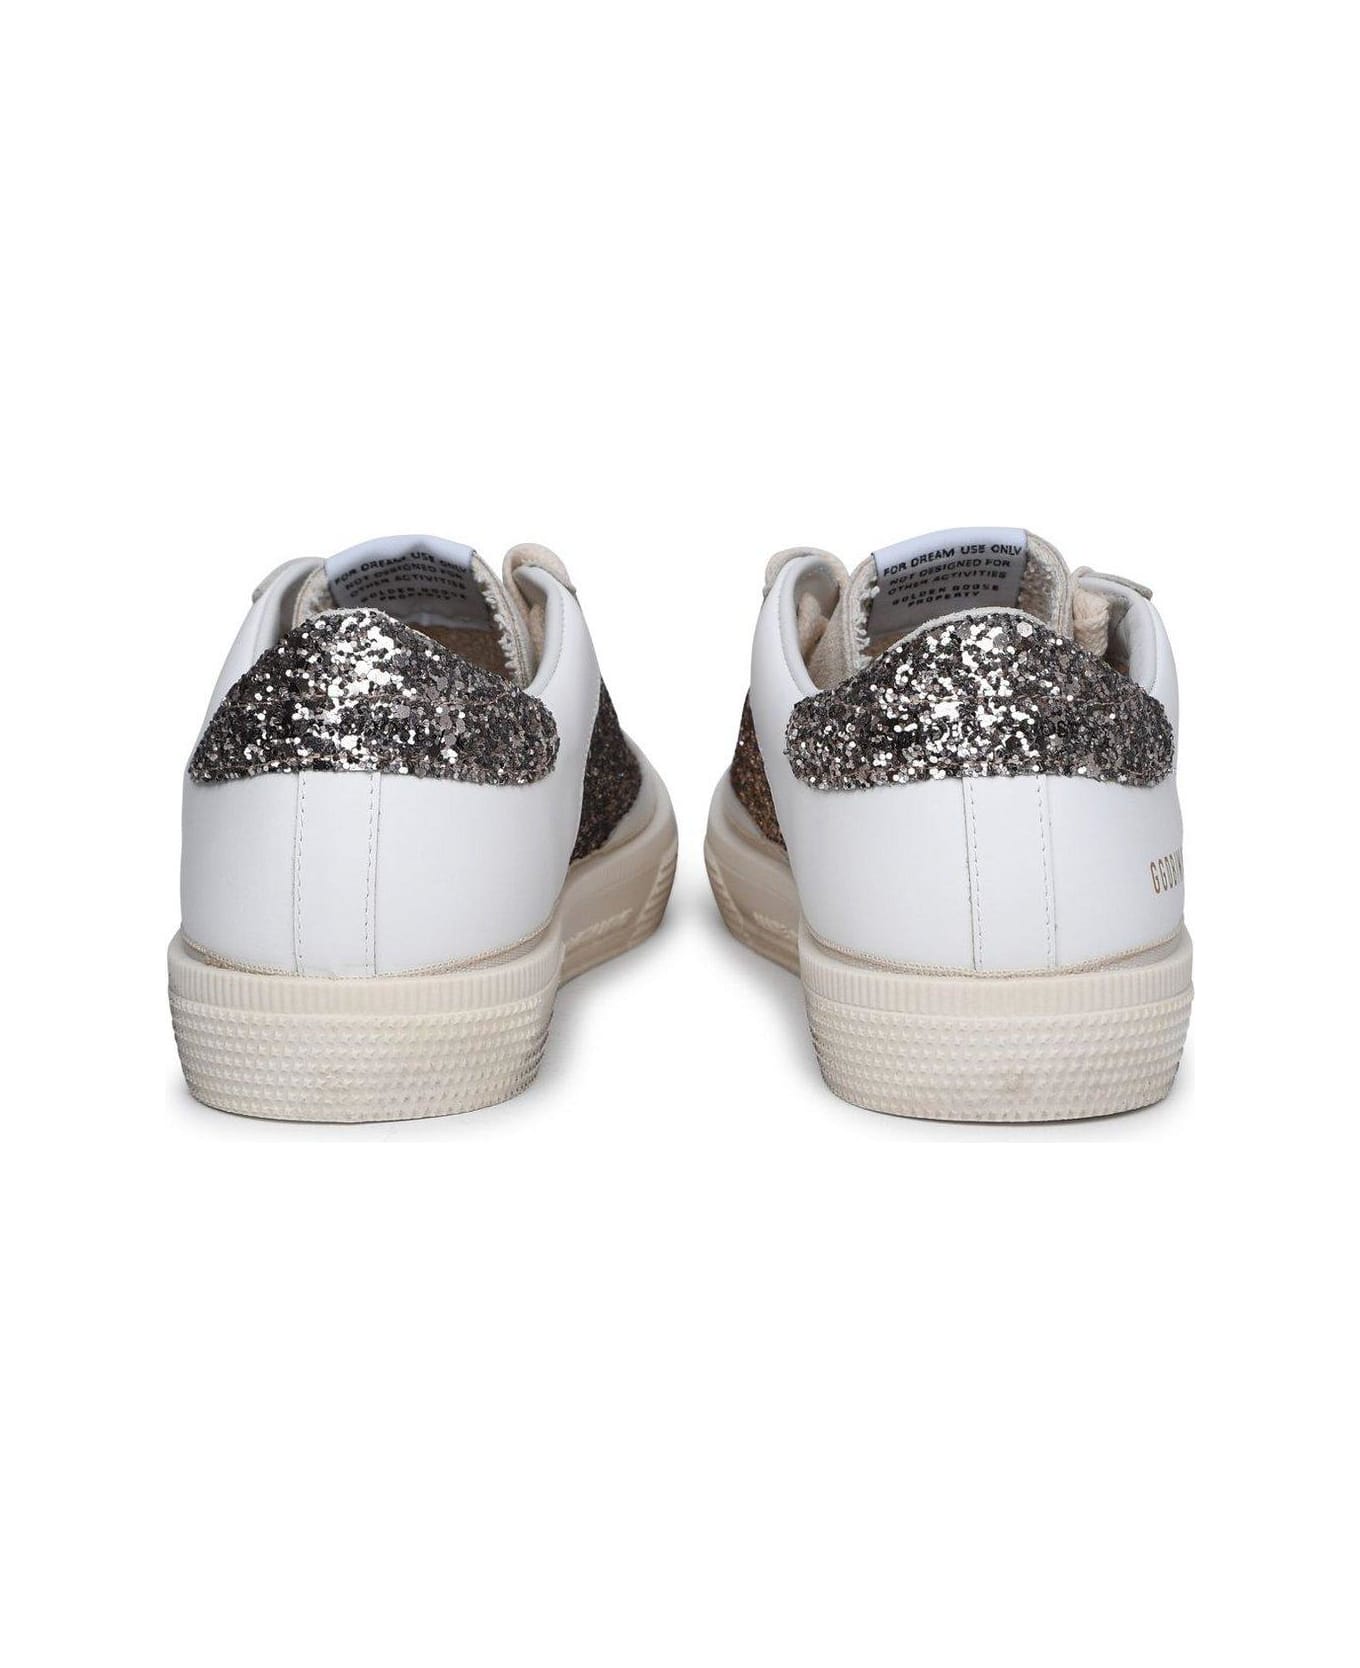 Golden Goose N May Star Glittered Sneakers - Optic white